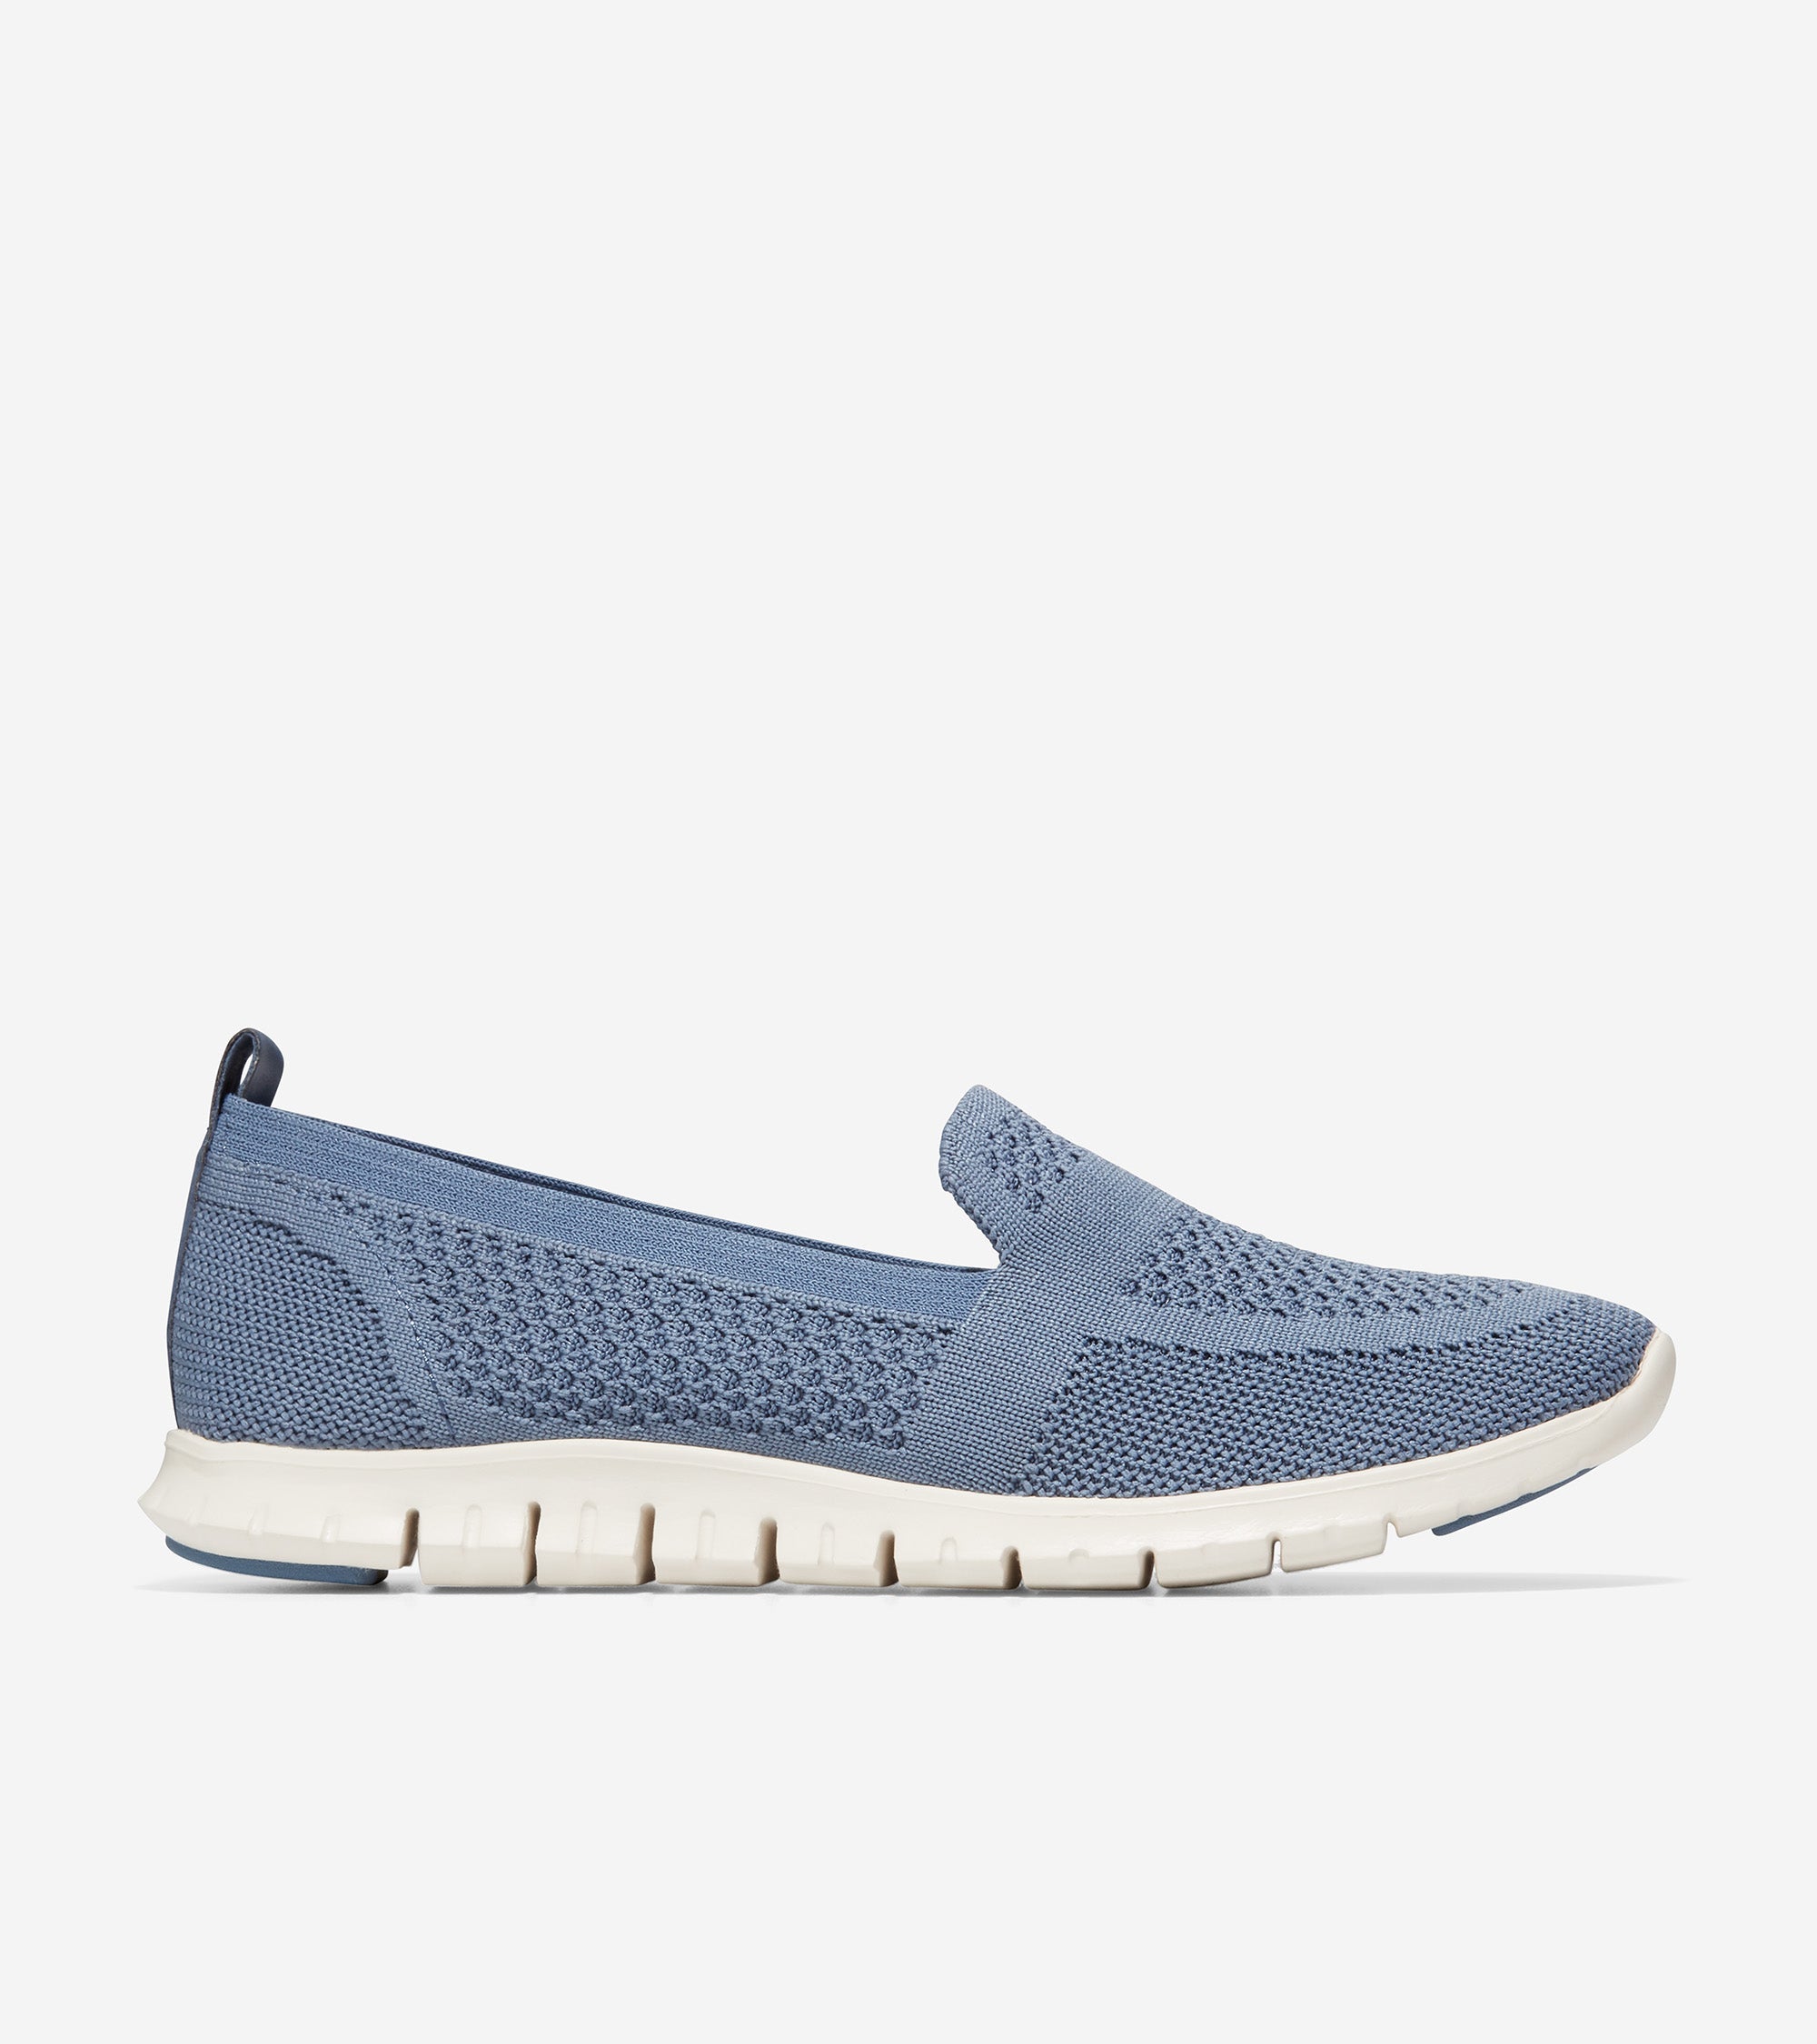 ZERØGRAND Slip-On Loafer - Cole Haan Singapore